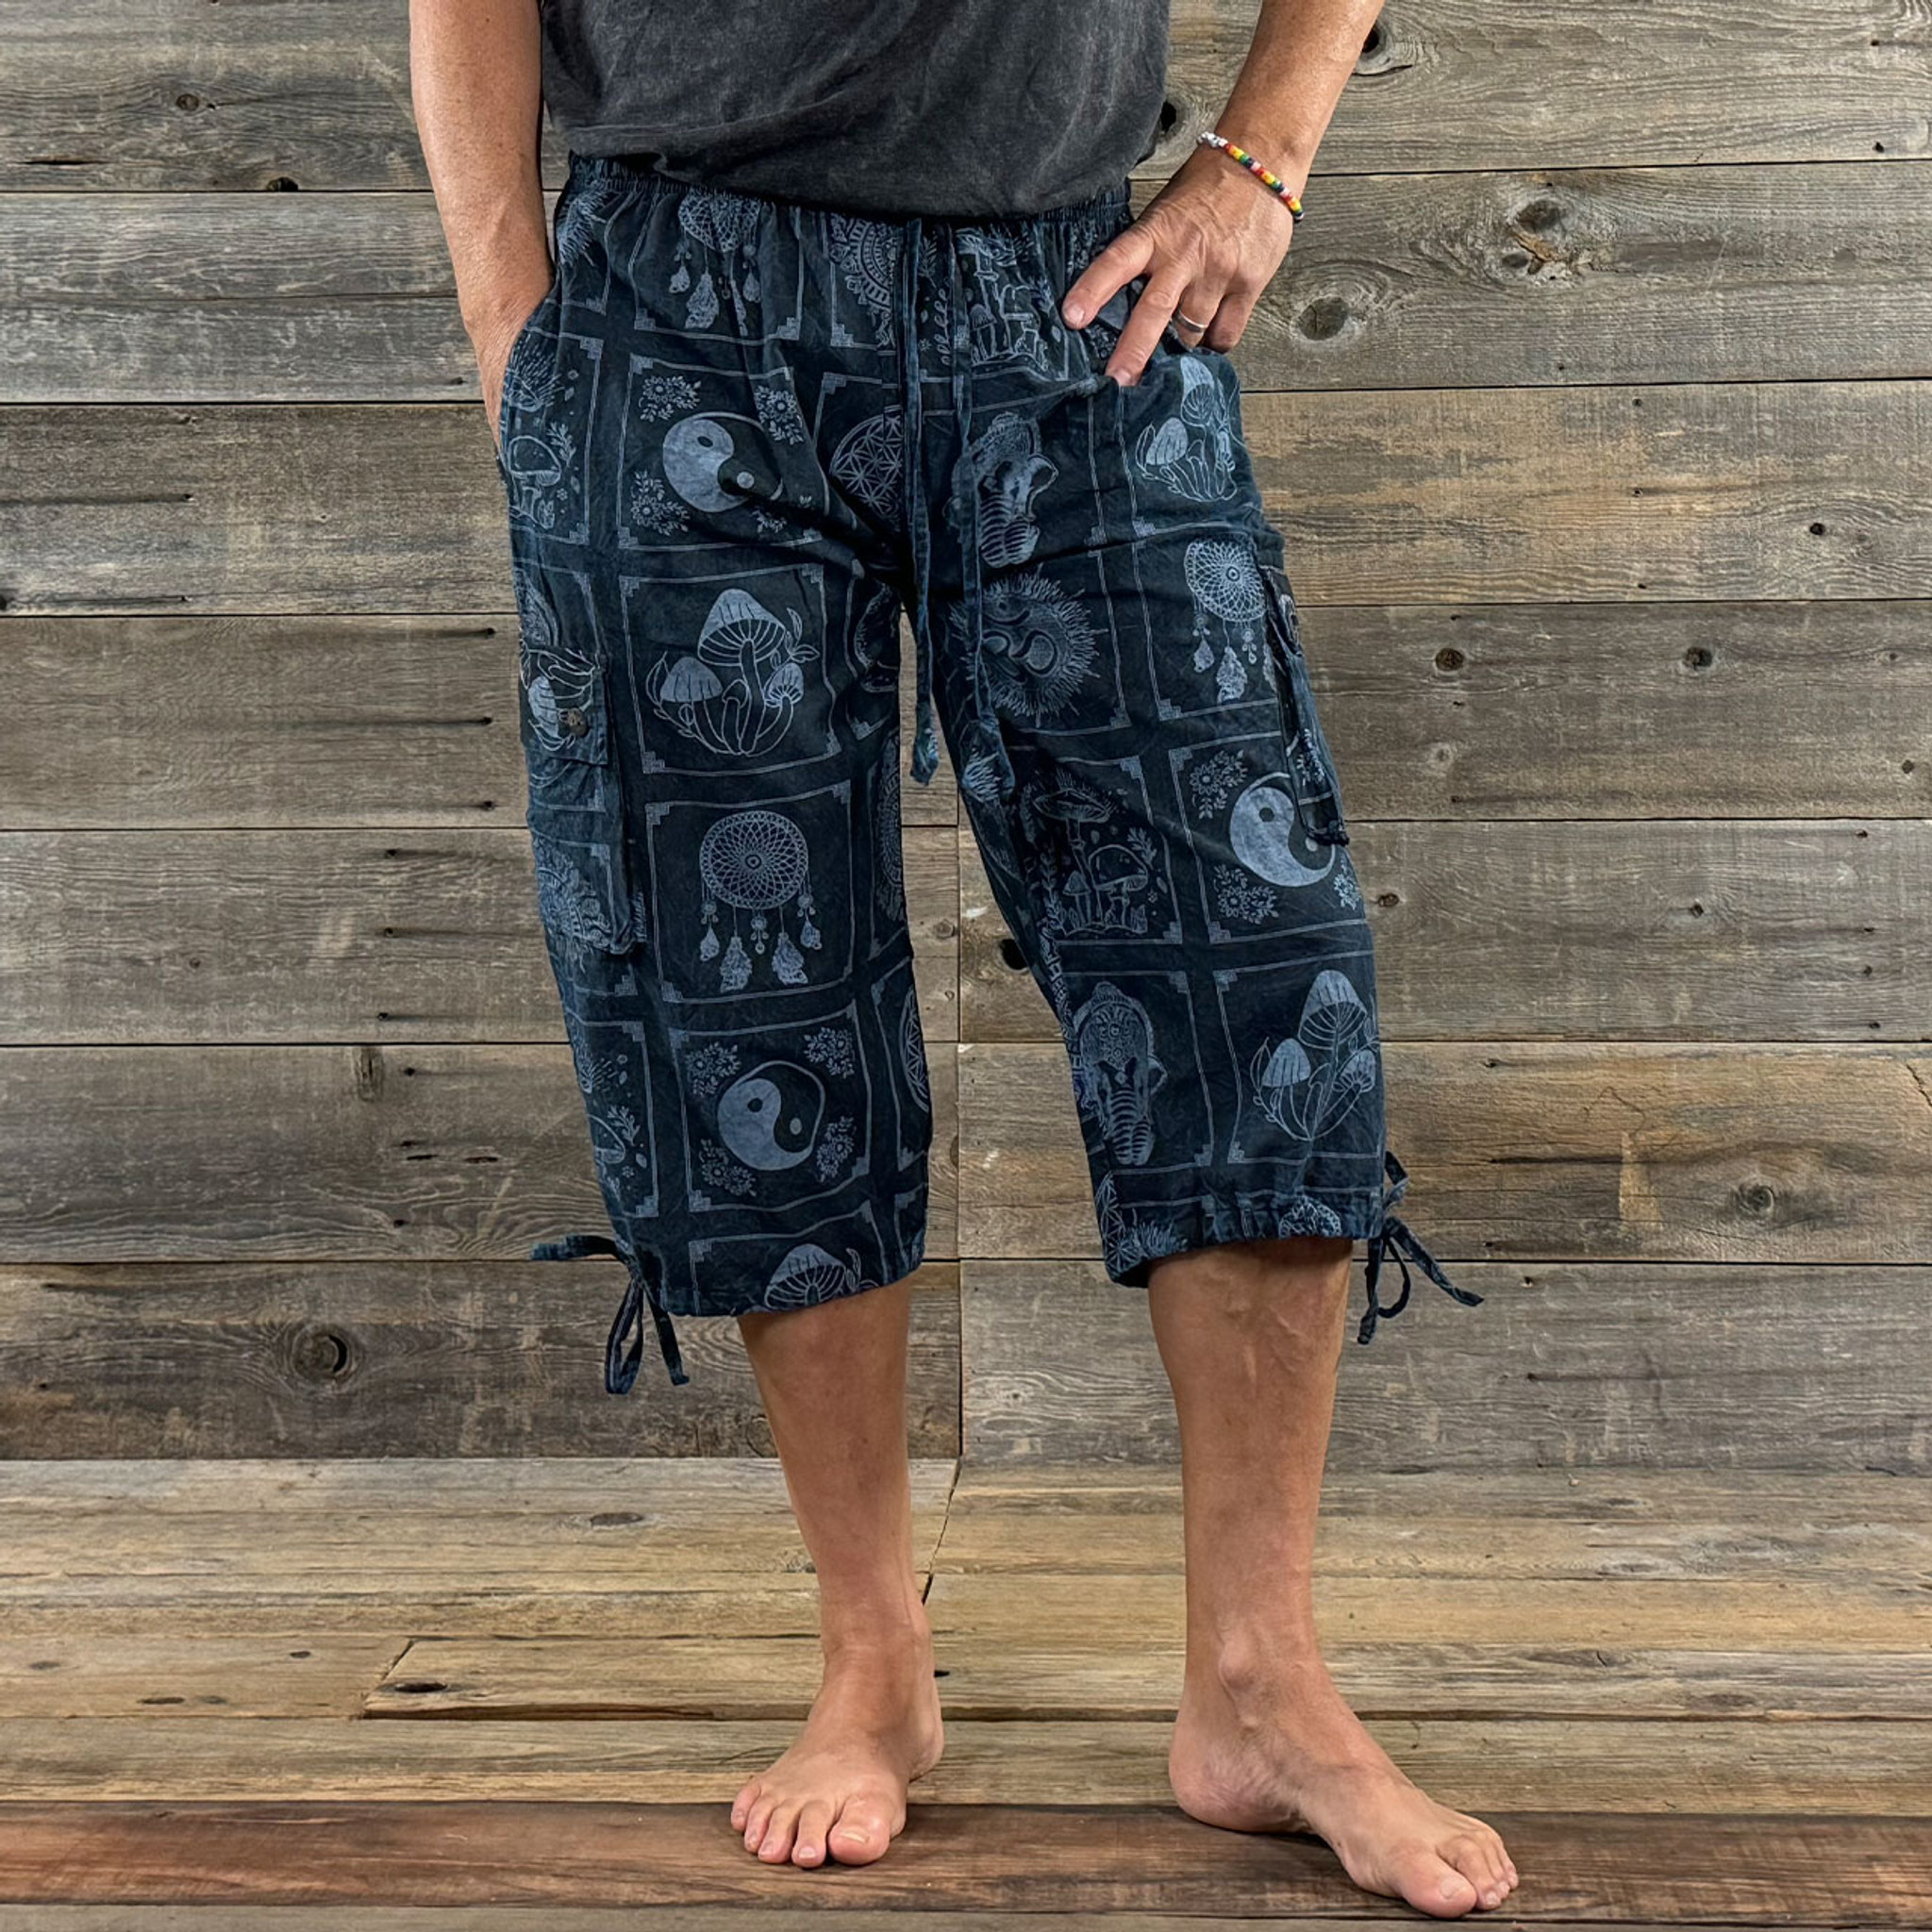 A LITTLE BIT OF EVERYTHING DIGGERS Cotton Enzyme Dye Clam Diggers - 3/4 Pants w/ Multi Print